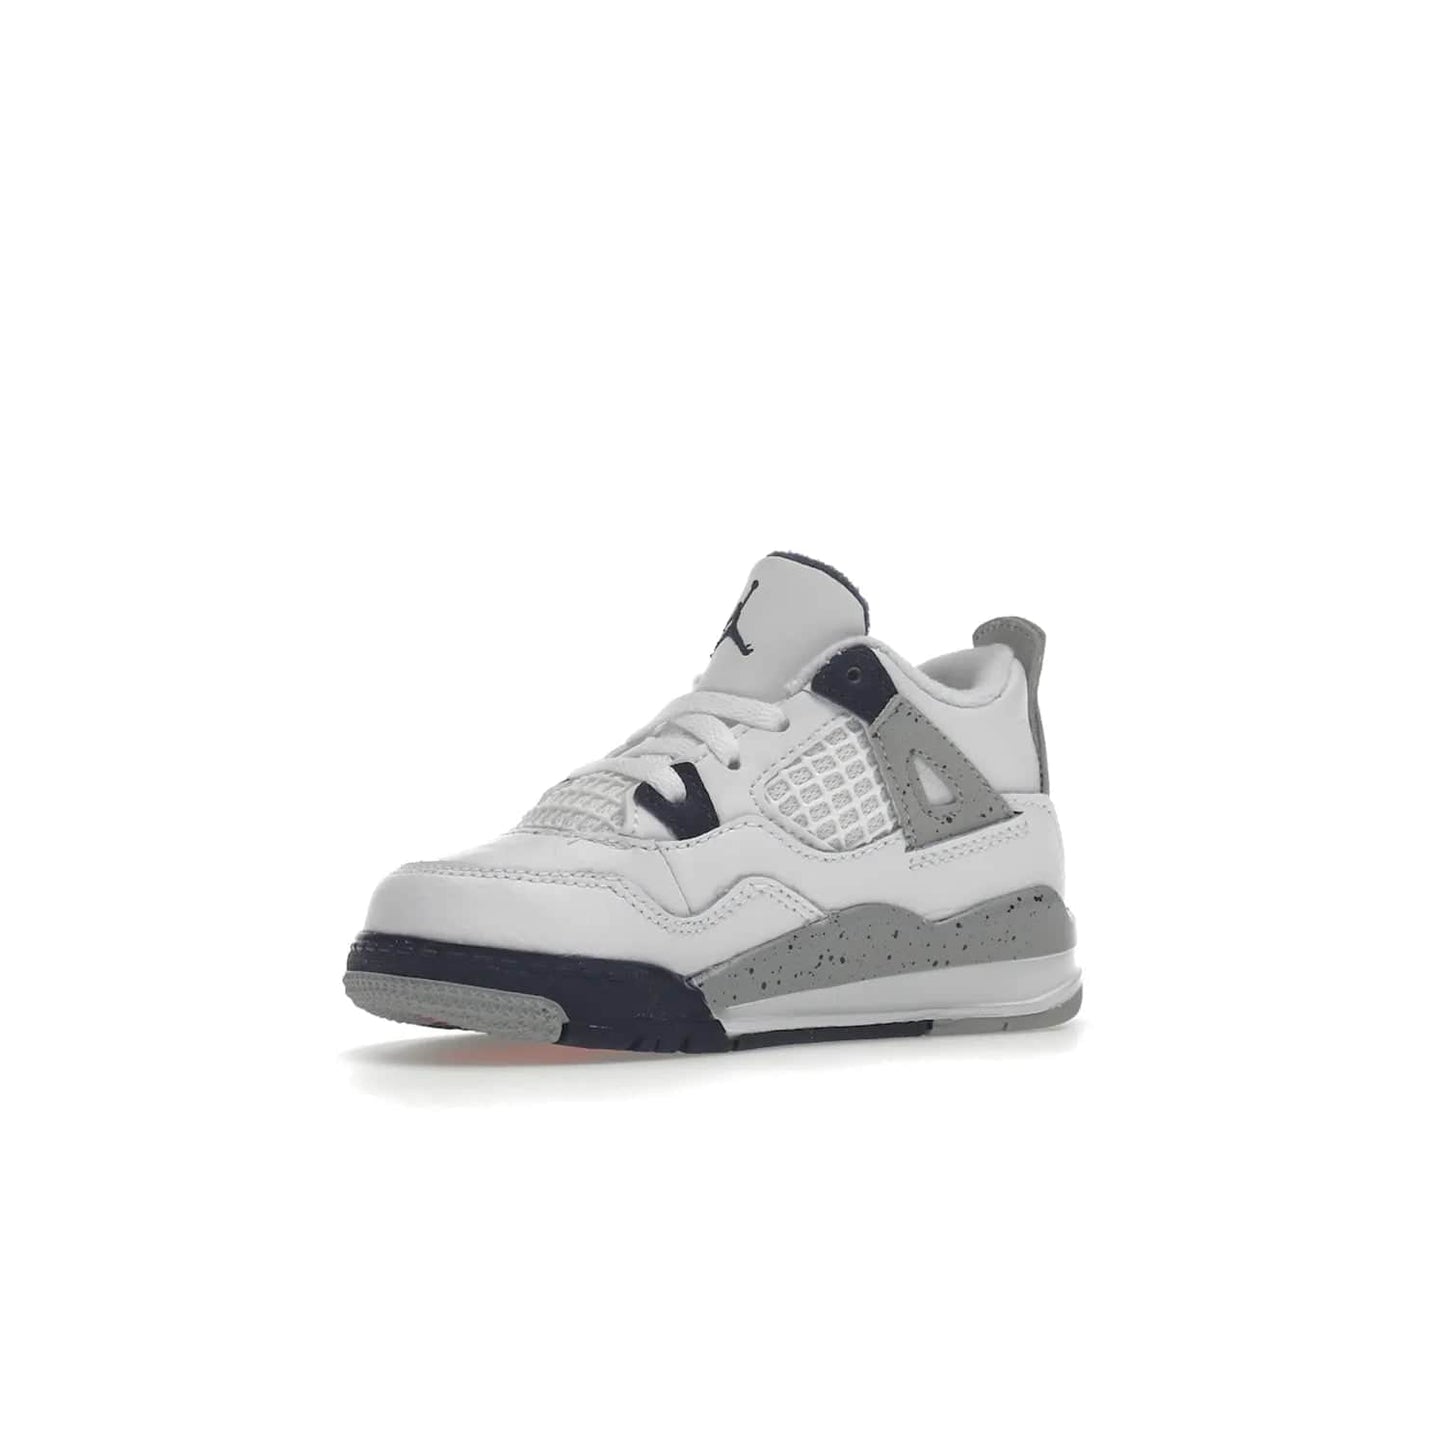 Jordan 4 Retro Midnight Navy (TD) - Image 16 - Only at www.BallersClubKickz.com - Introducing the Jordan 4 Retro Midnight Navy (TD) for kids. White leather upper with navy and grey accents plus fire red detailing. Perfect for everyday wear. Get yours before they sell out.